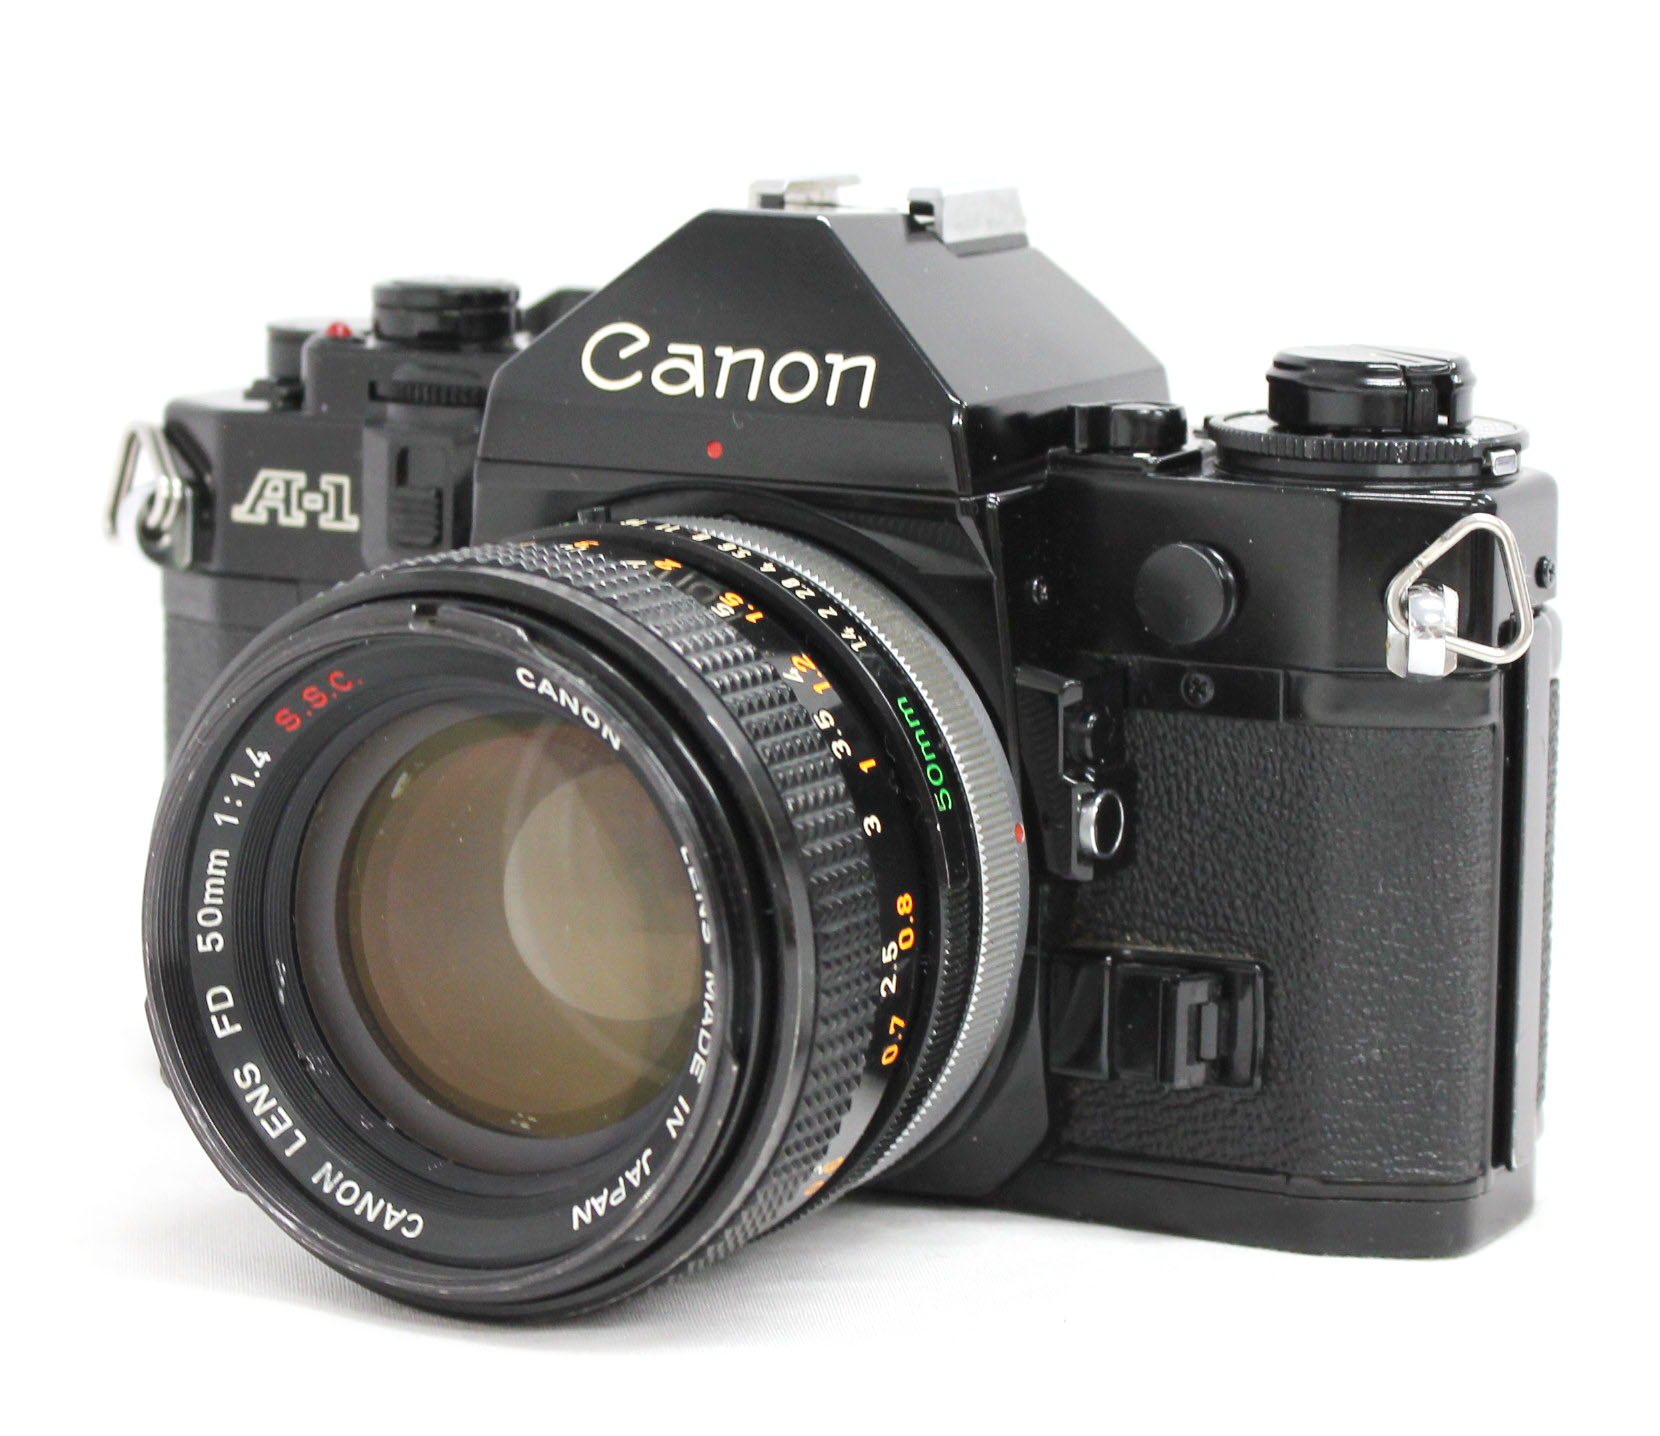 Japan Used Camera Shop | [Excellent++++] Canon A-1 35mm SLR Film Camera with FD 50mm F/1.4 S.S.C. Lens from Japan